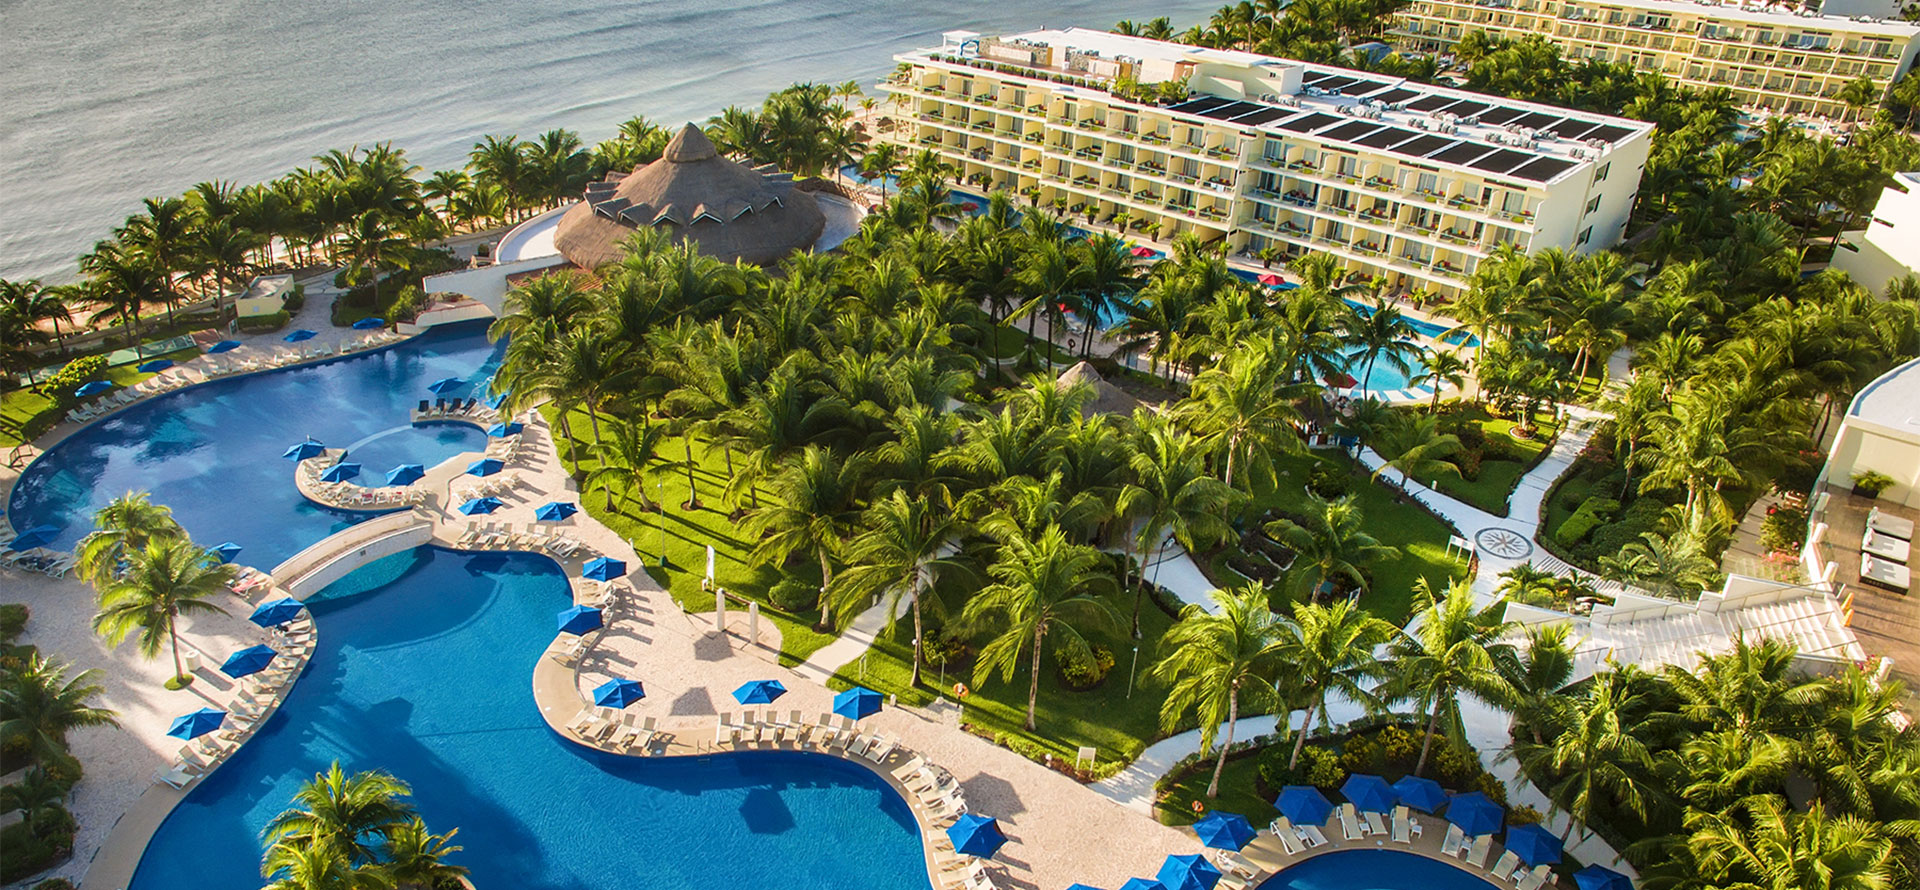 Сancun all-inclusive adults only resort and palms.